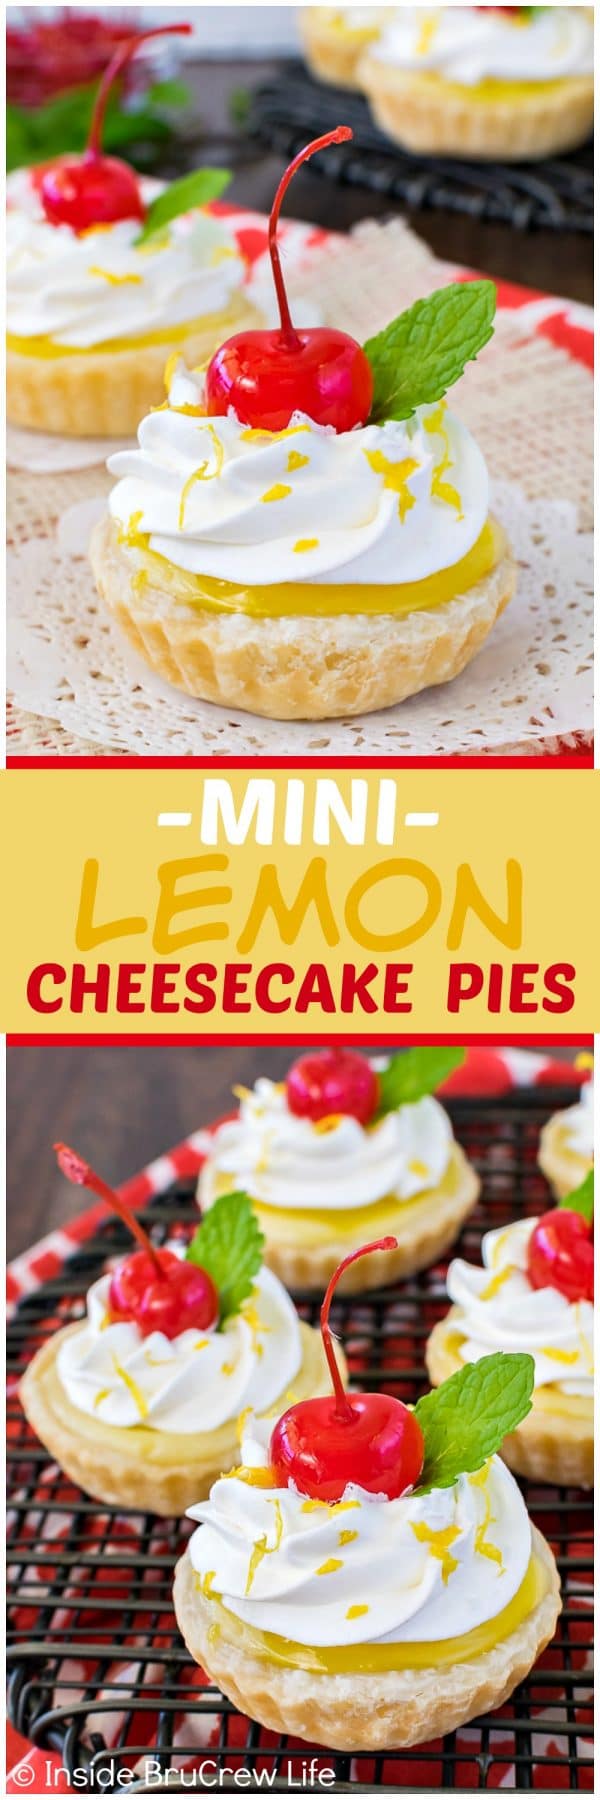 2 pictures of mini lemon cheesecakes separated by a box of text.